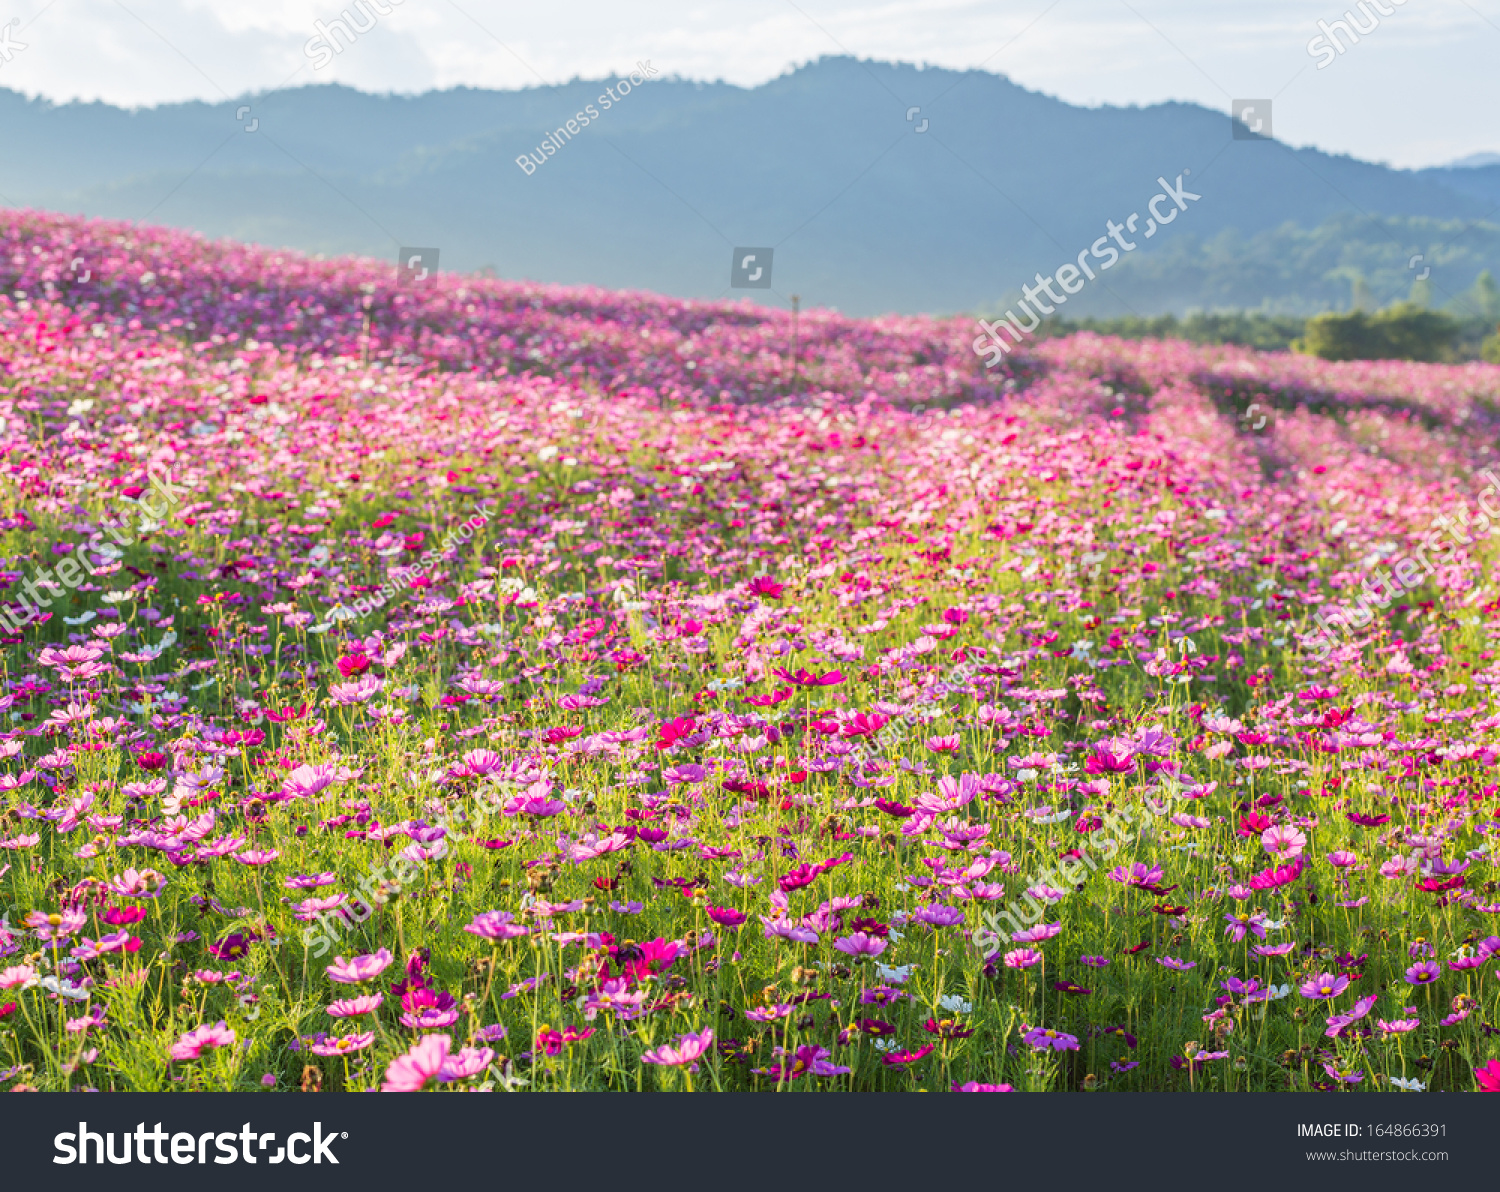 Pink cosmos flower fields with mountain background. Spring blossom nature #164866391